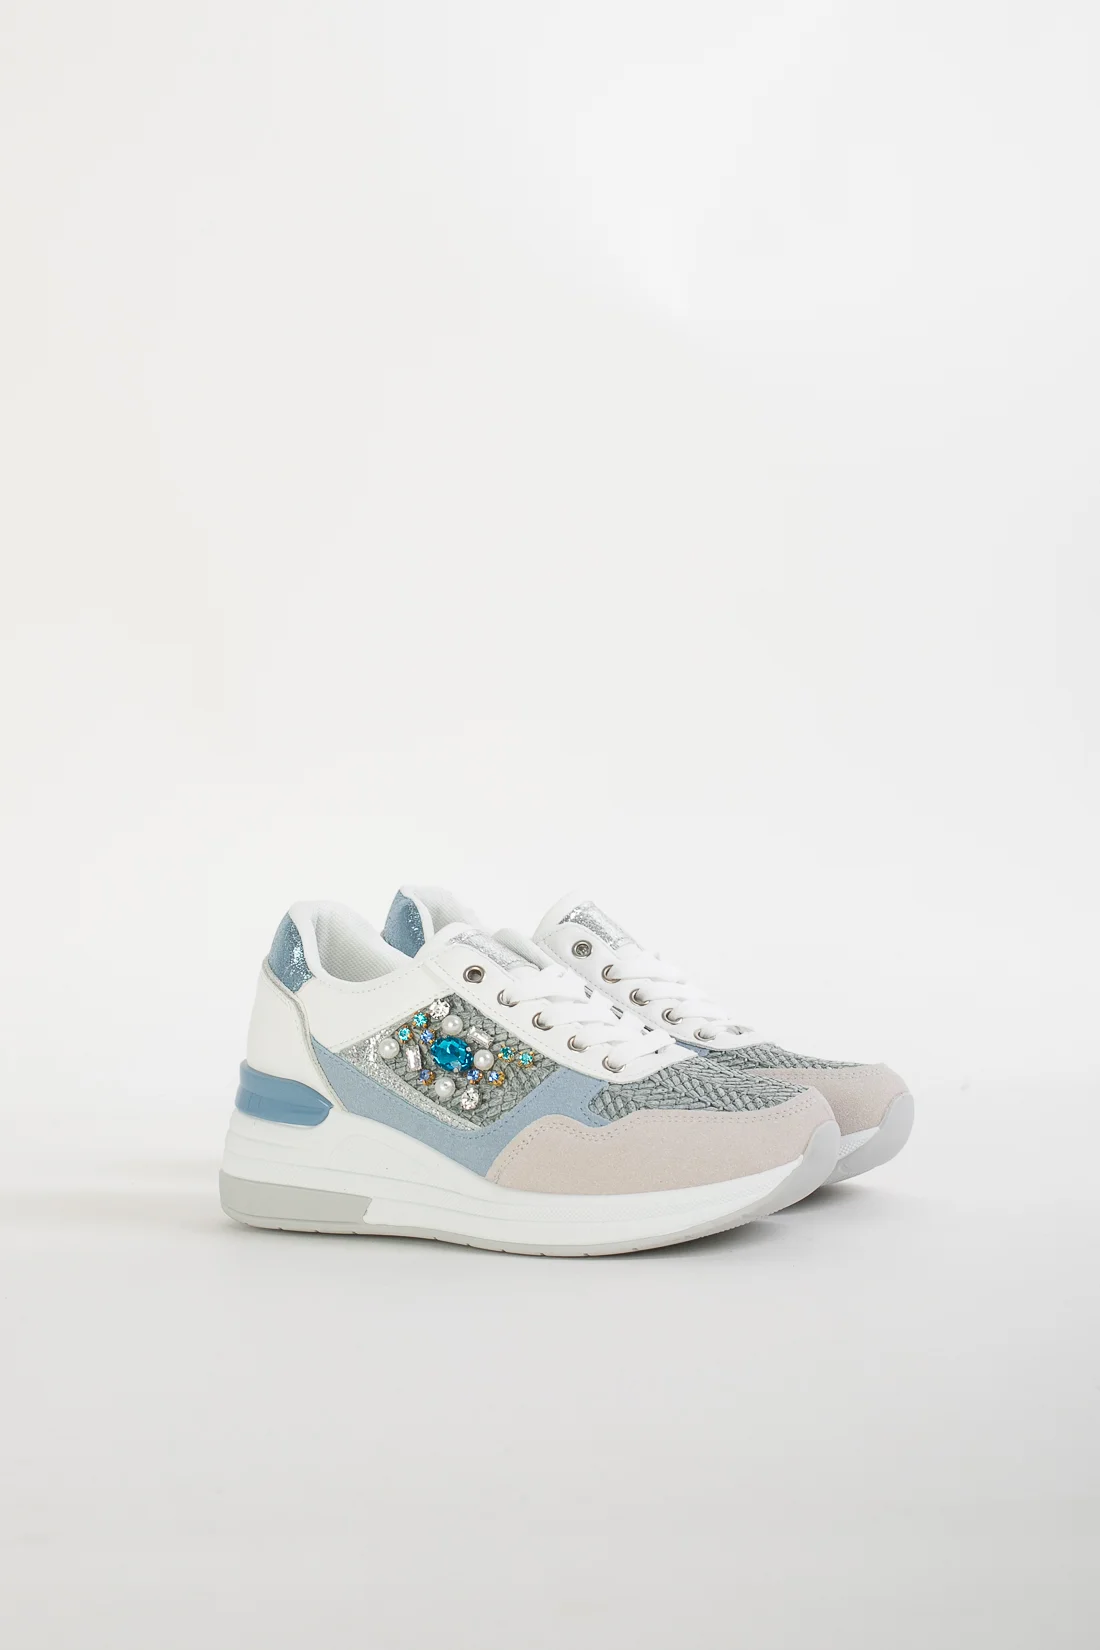 MILASS CASUAL SNEAKERS - BLUE